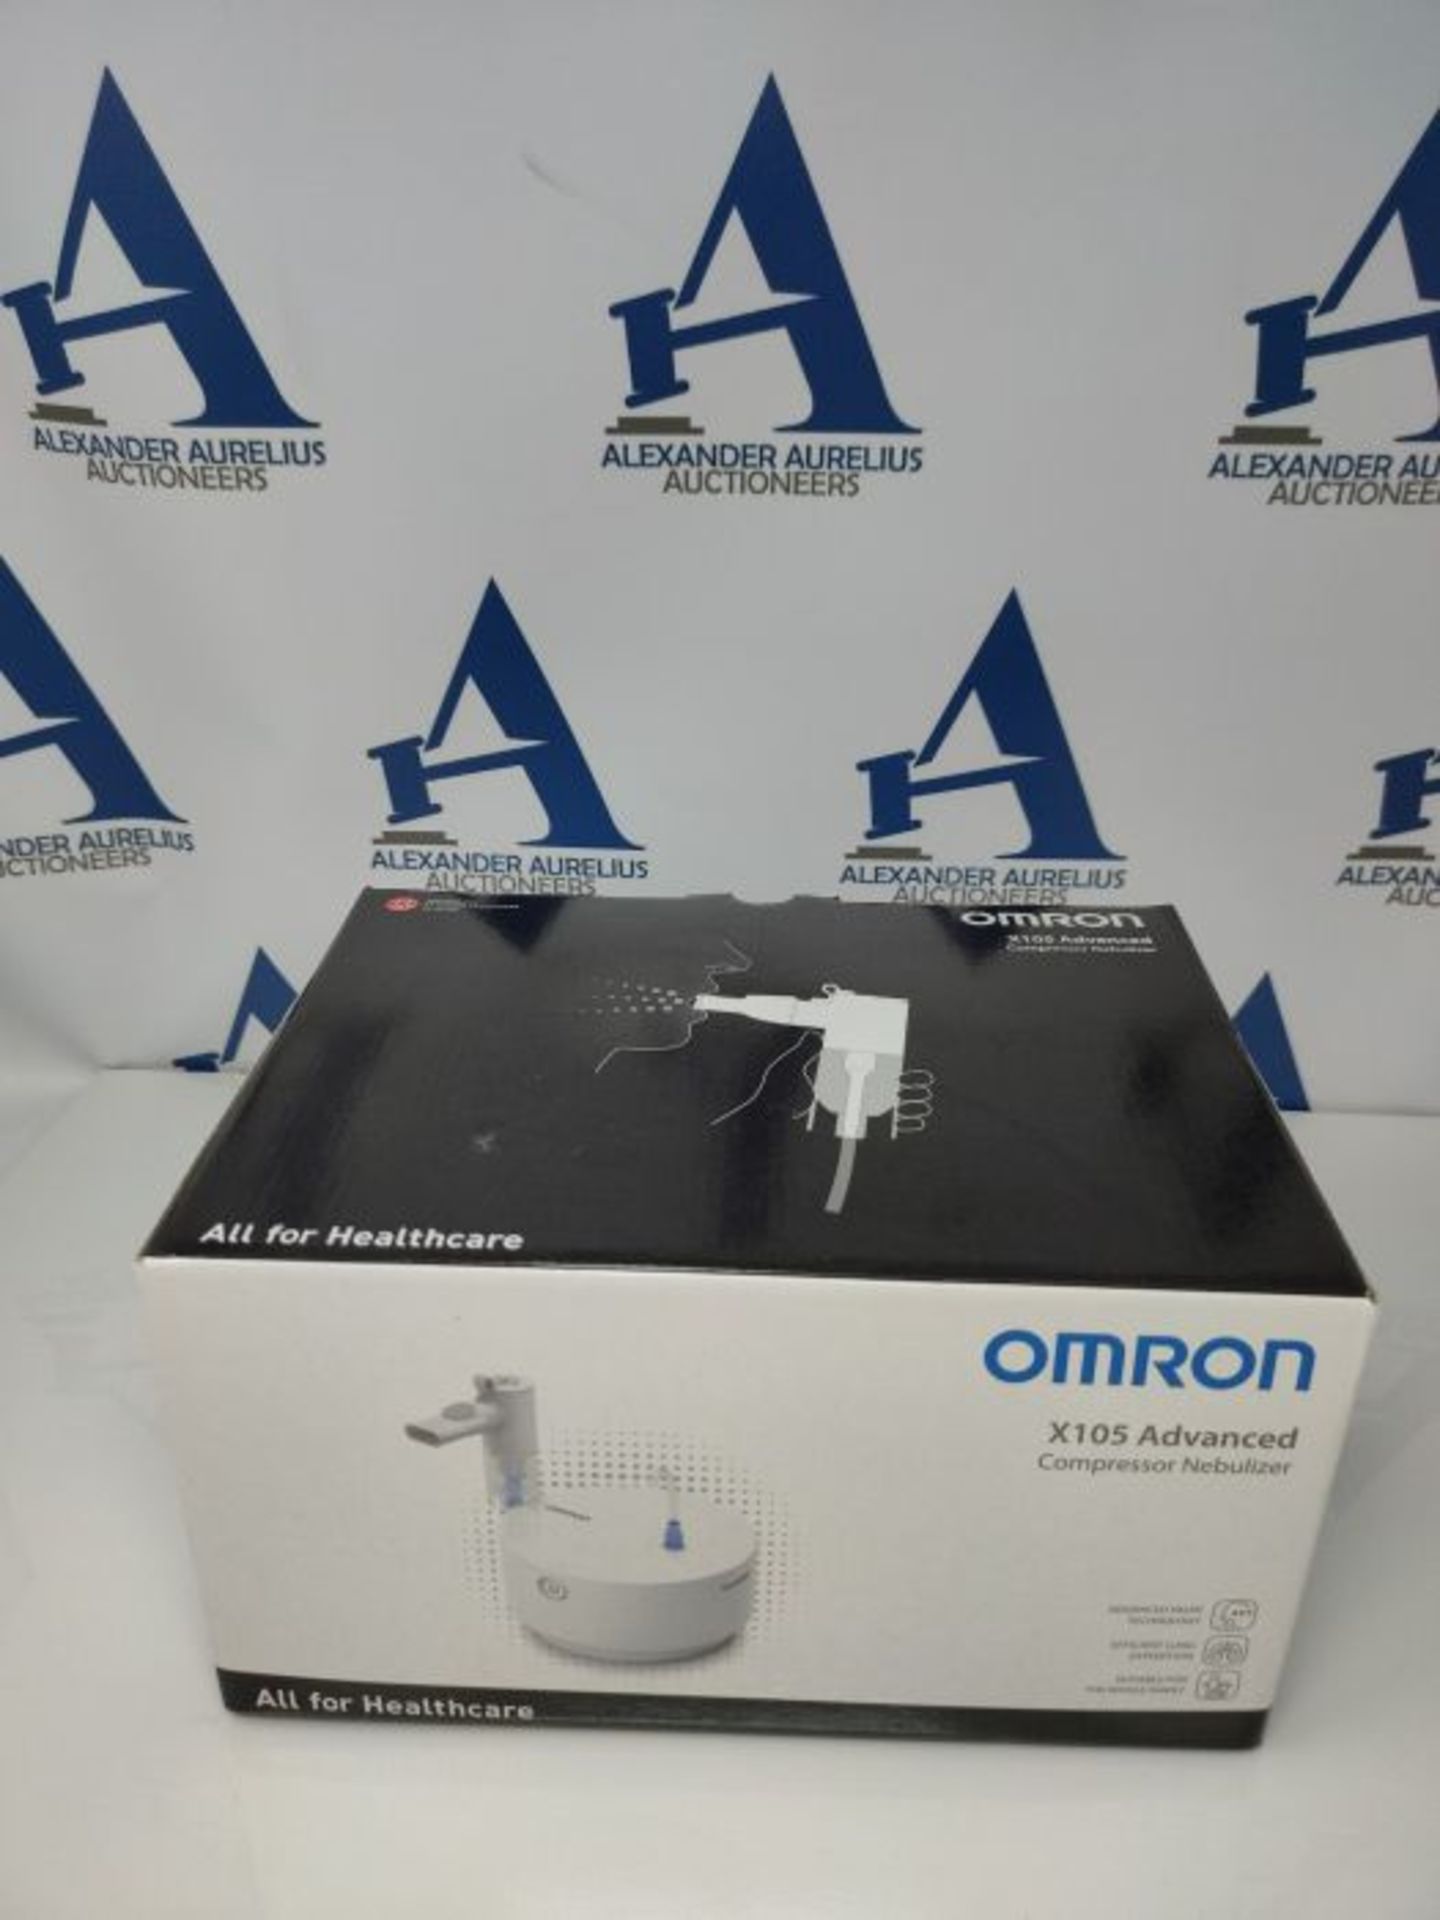 RRP £72.00 OMRON X105 Advanced All-in-One Nebuliser, One Nebuliser for Acute and Chronic Respirat - Image 2 of 3